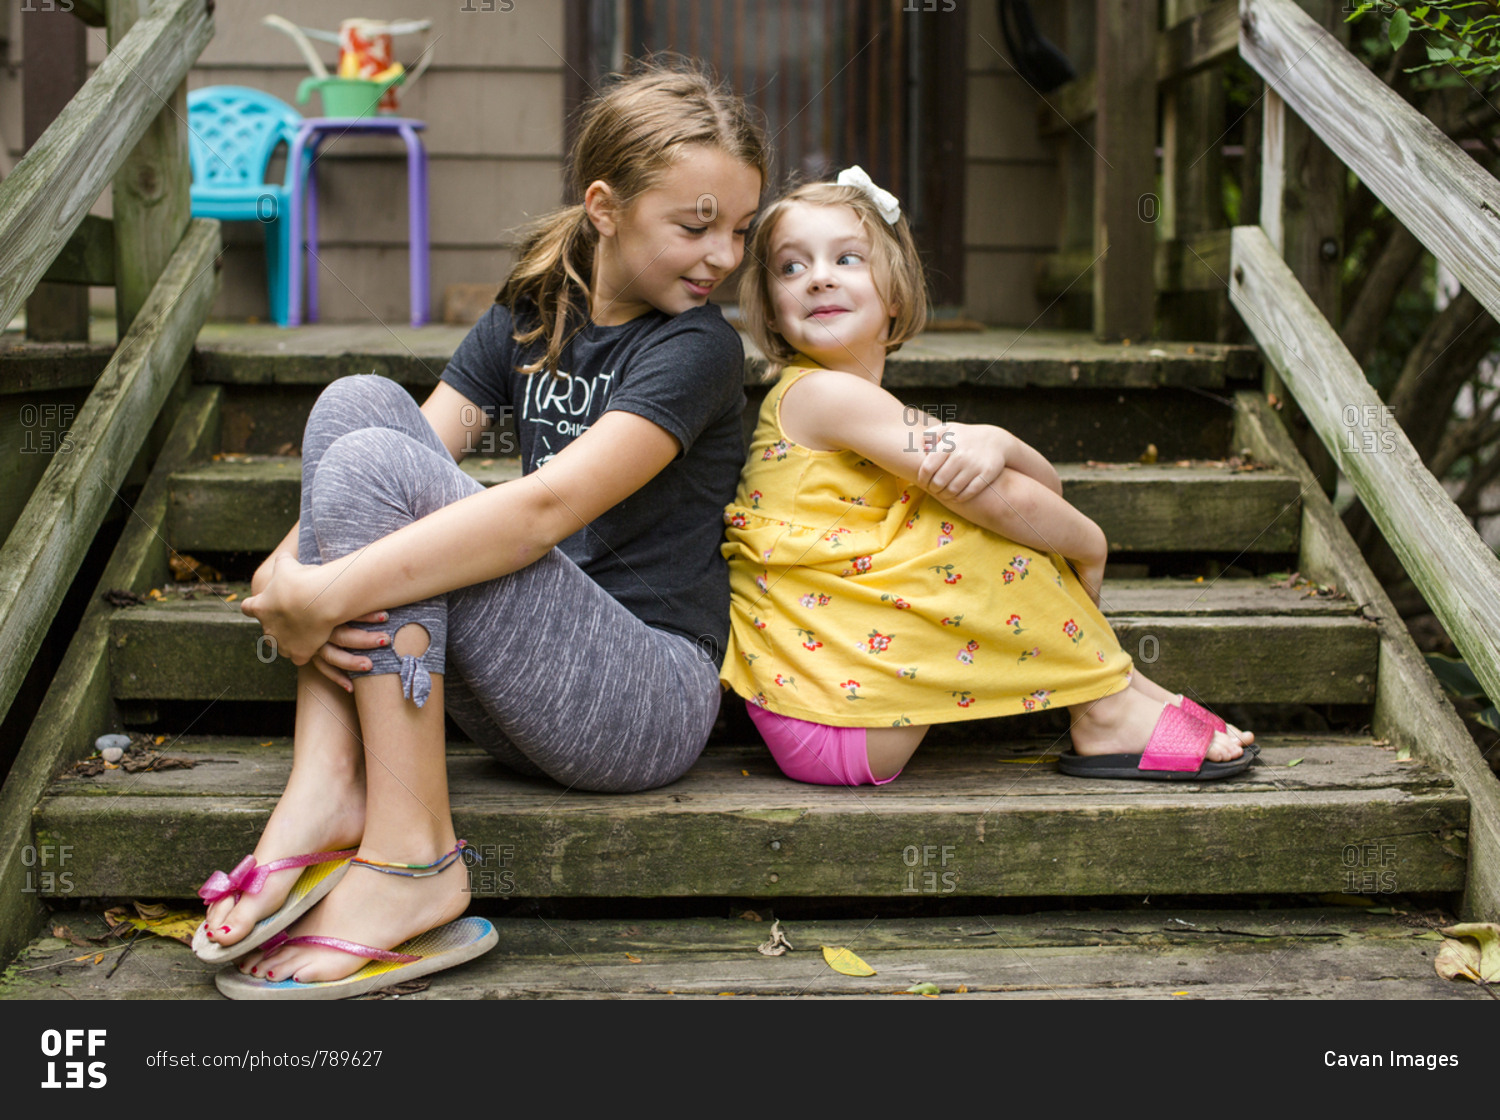 Cute sisters looking at each other while sitting on steps against house in yard